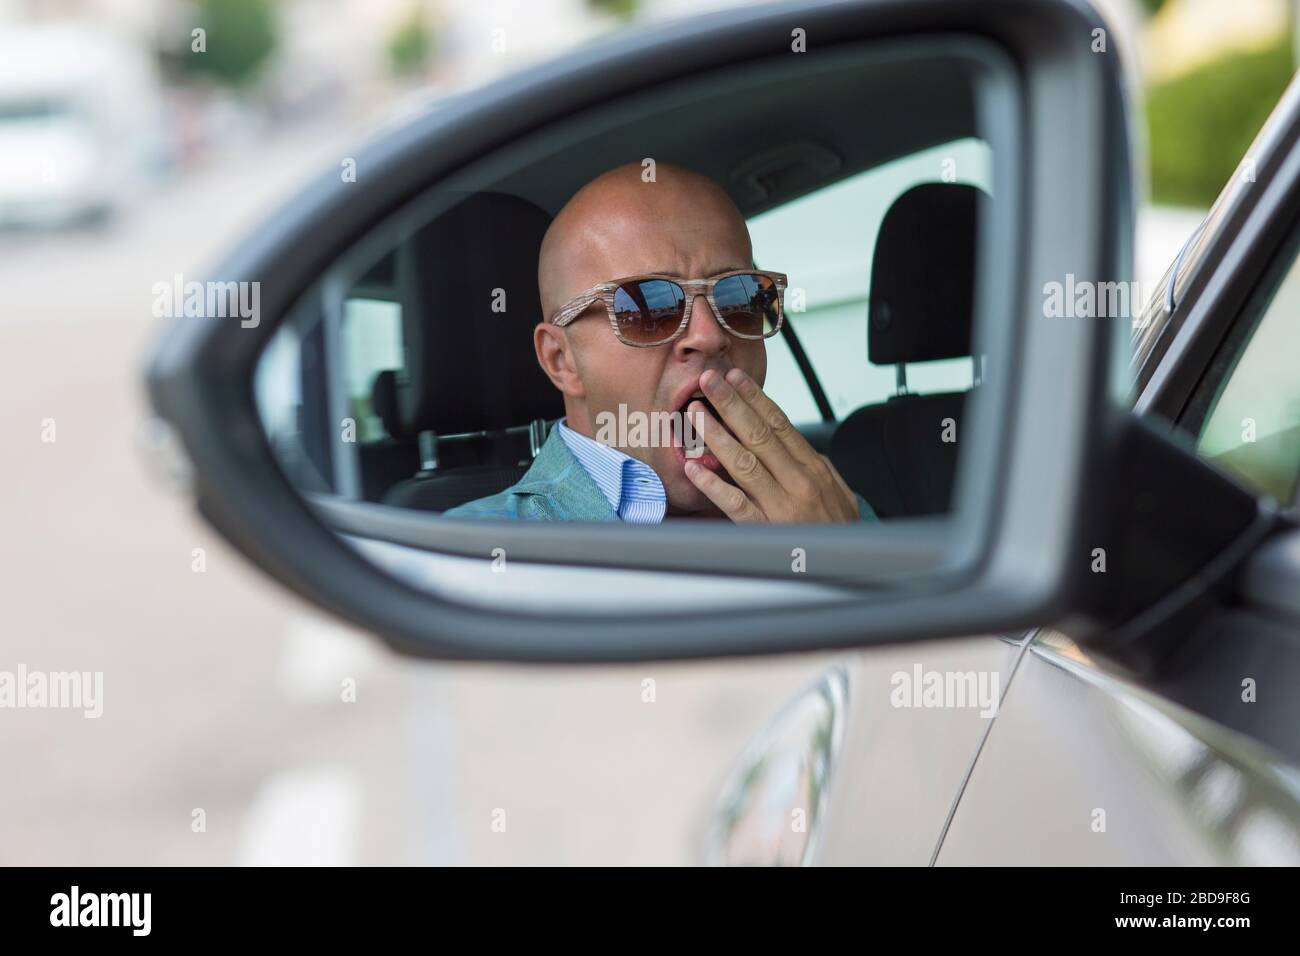 Side mirror view reflection sleepy tired fatigued yawning exhausted young man driving his car in traffic after long hour drive. Transportation sleep d Stock Photo